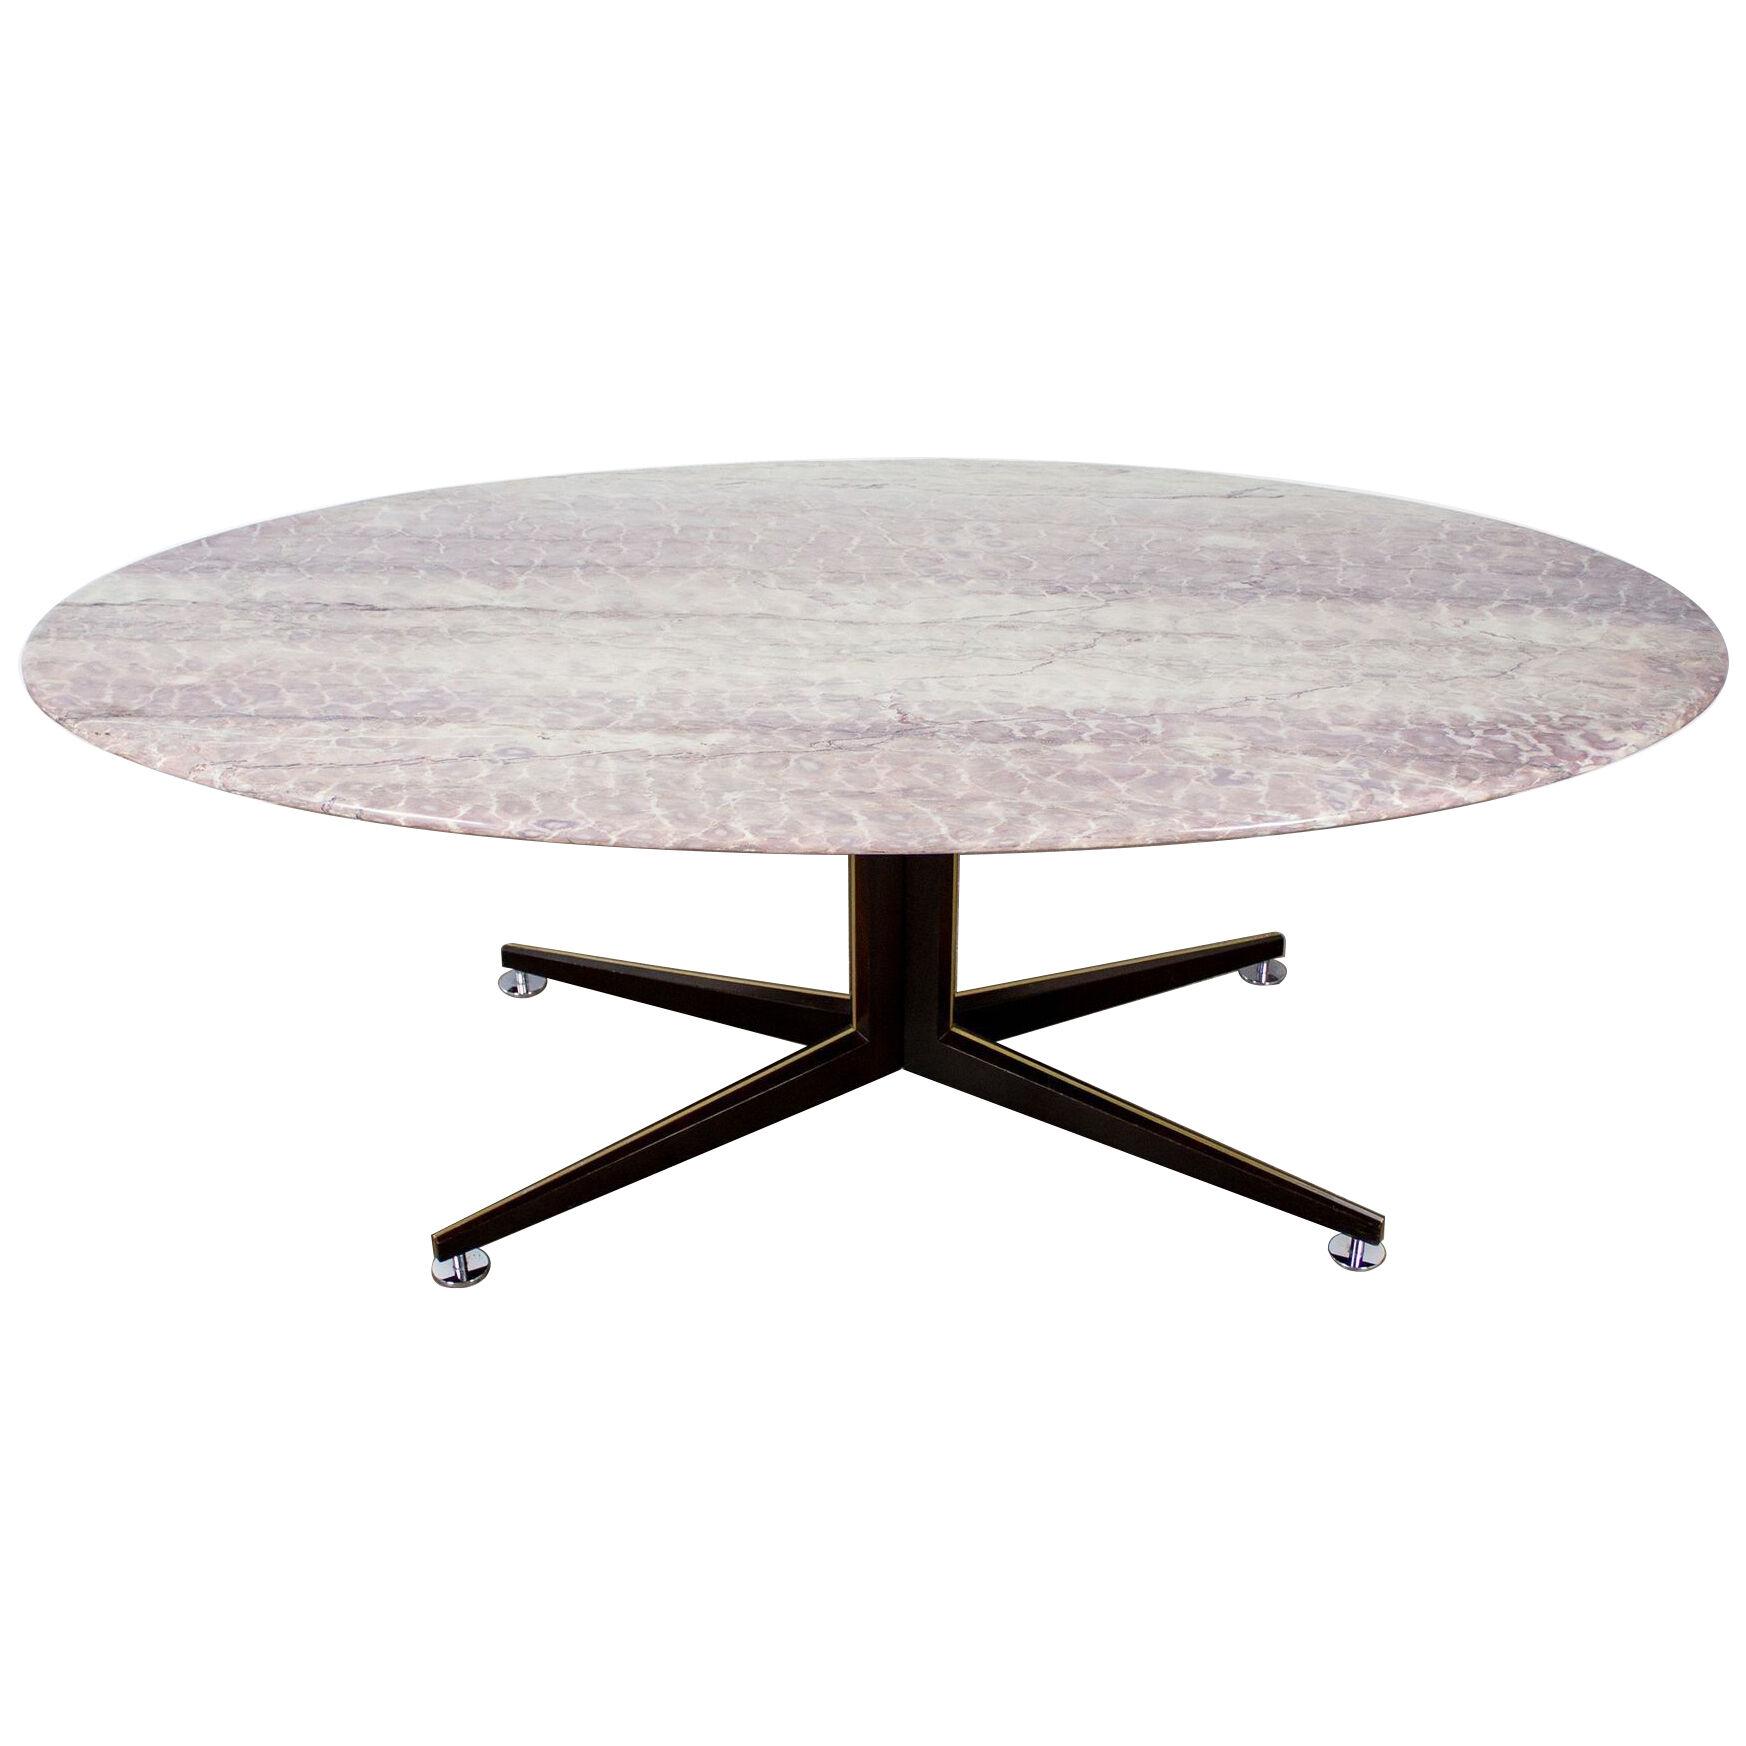 Dunbar Table Desk Model 1123 with Marble Top.